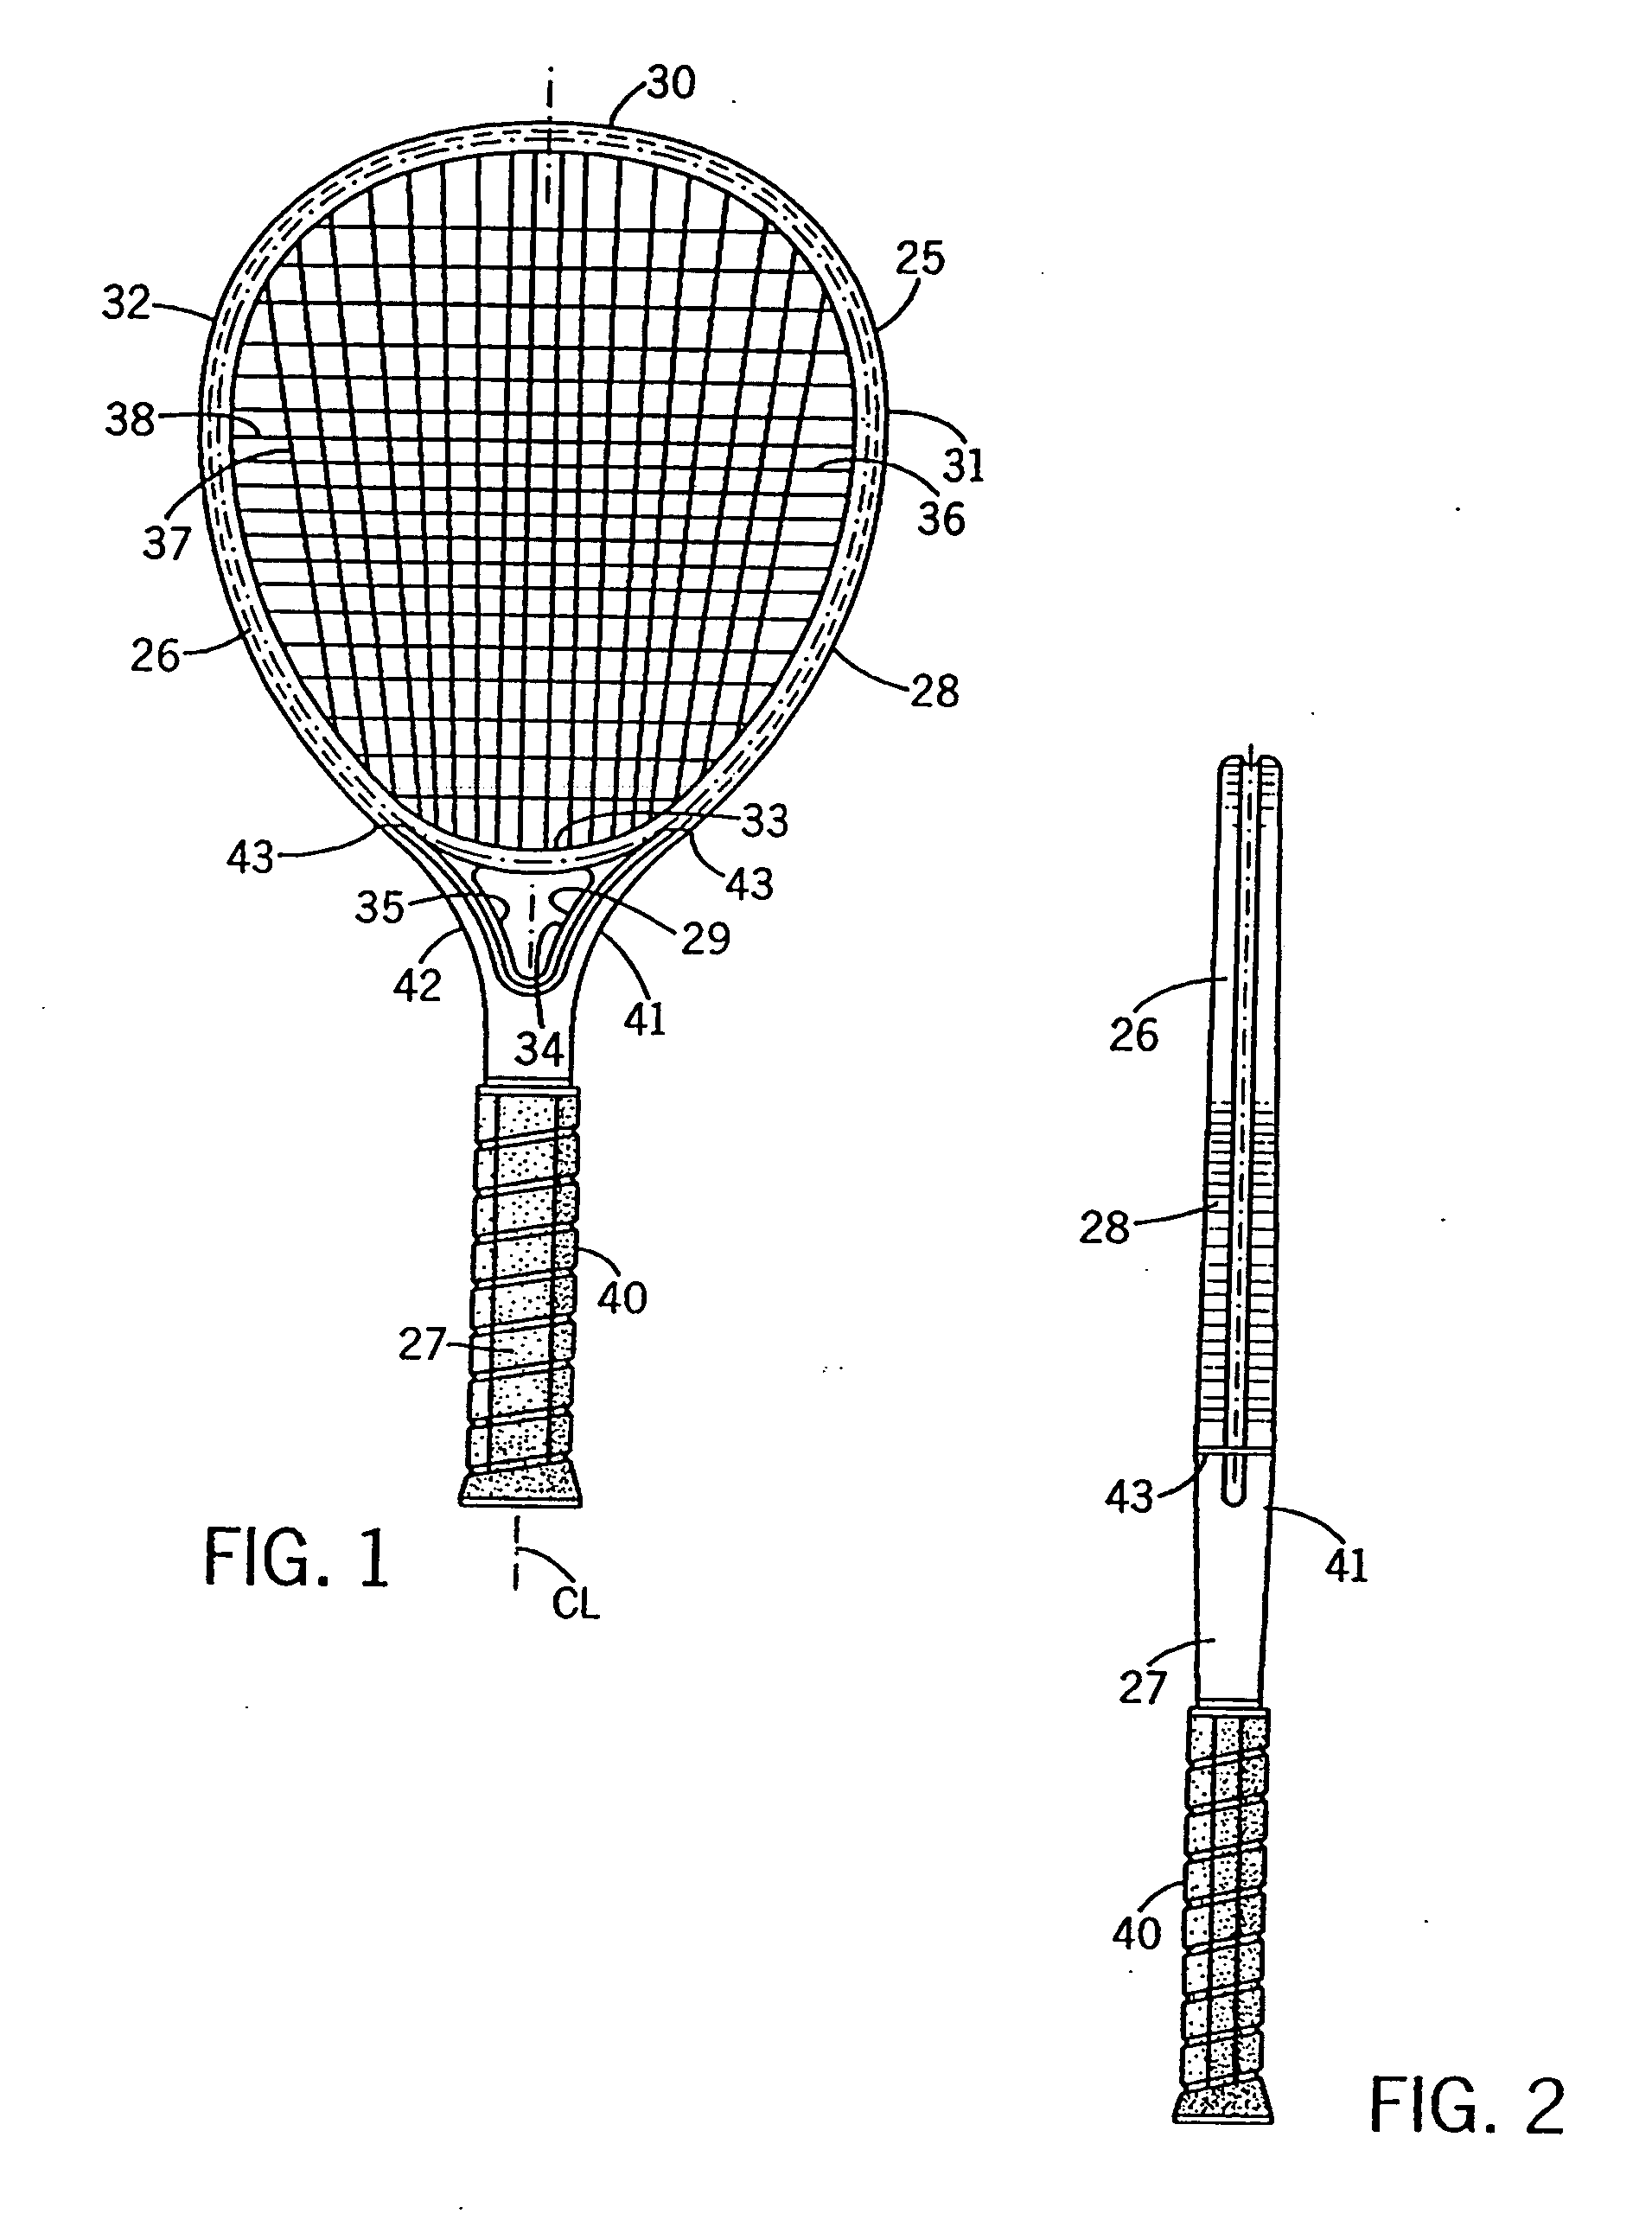 Game racquet with separate head and handle portions for reducing vibration